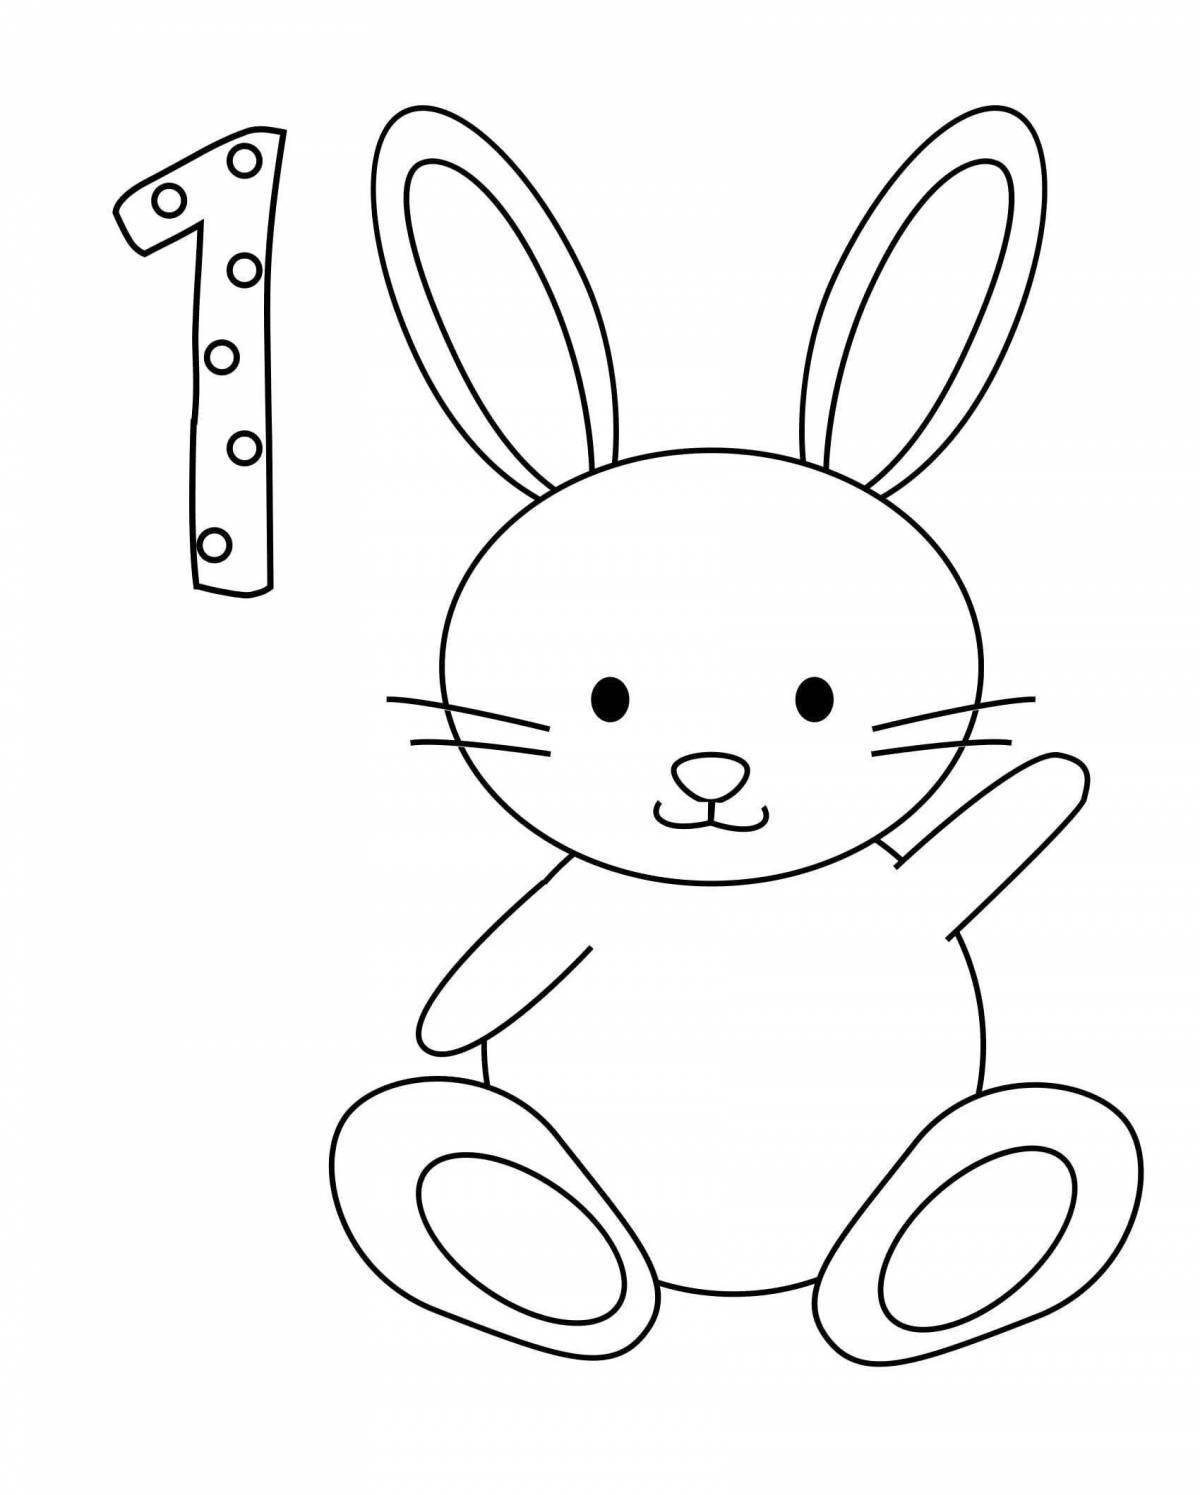 Bunny for children 2 years old #3